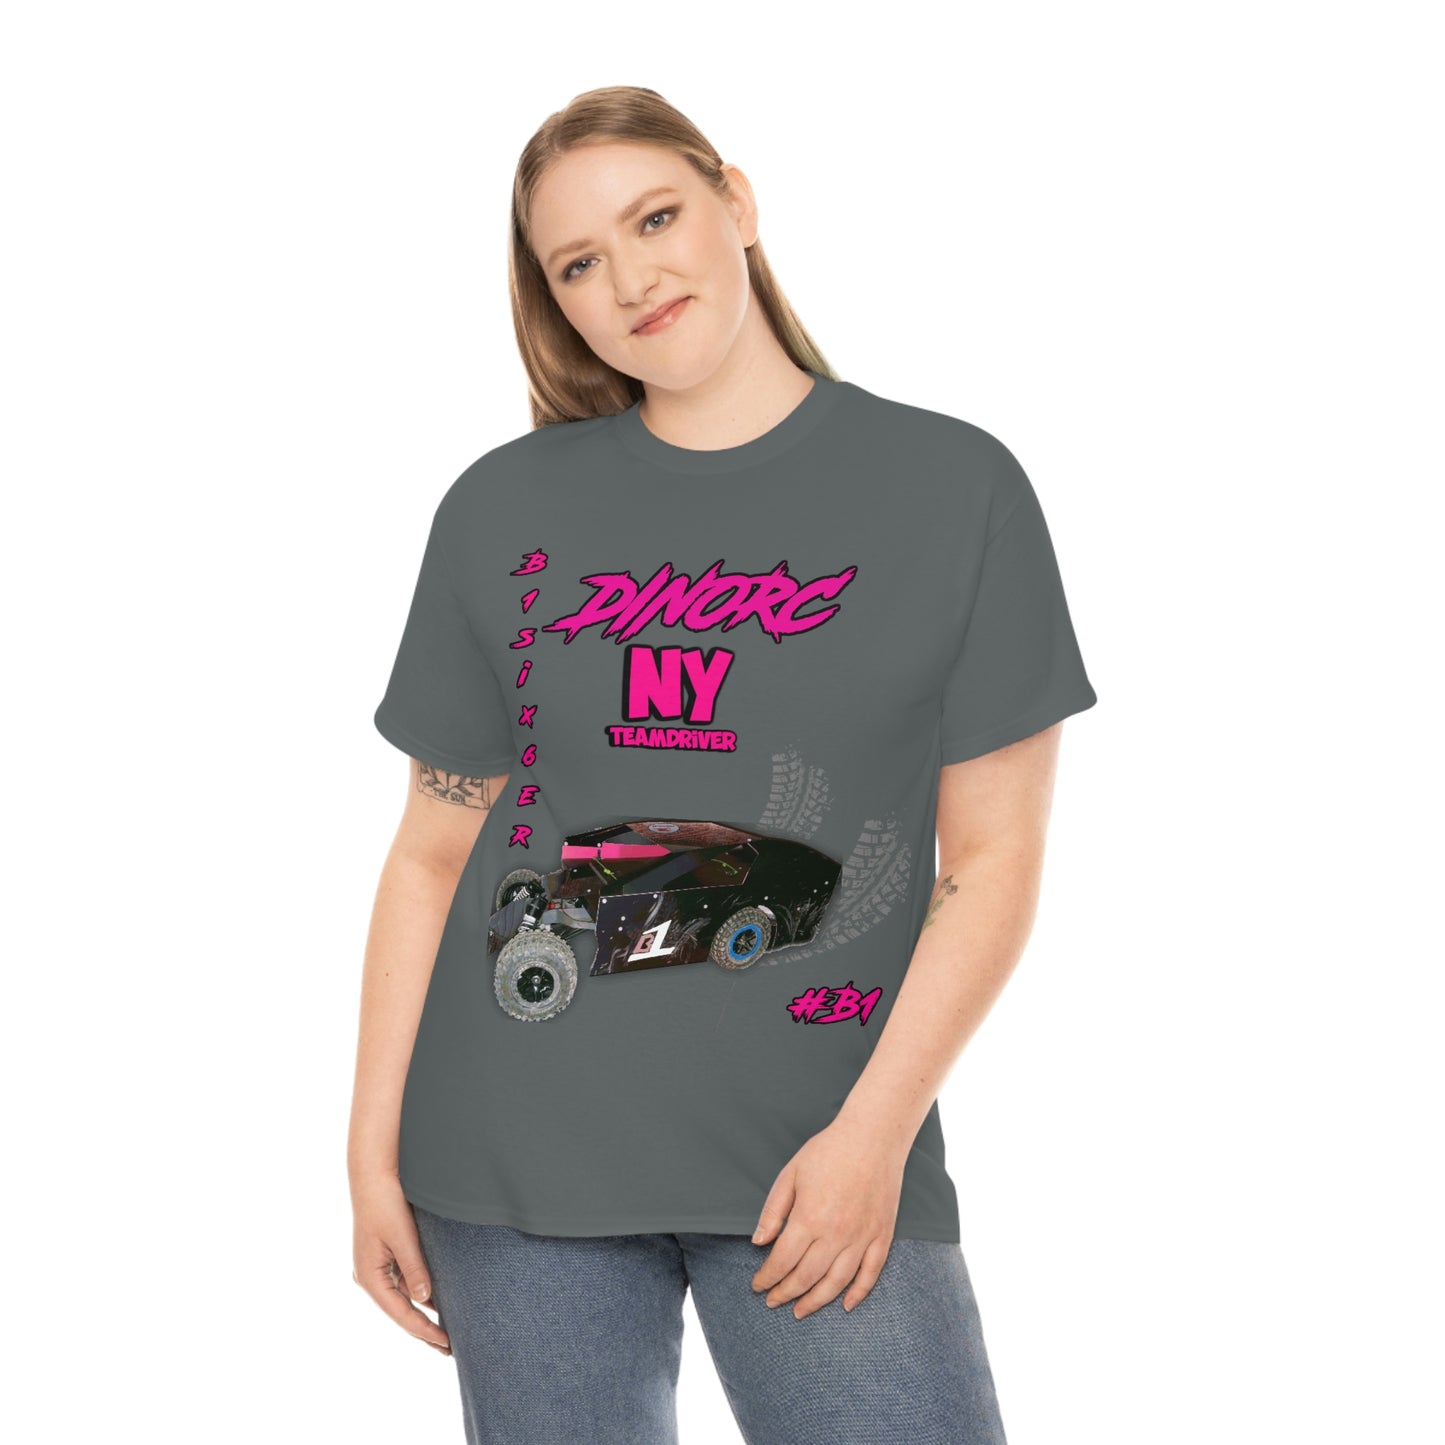 Team Driver Cherry Cherokee   Front and Back DinoRc Logo T-Shirt S-5x 5 colors